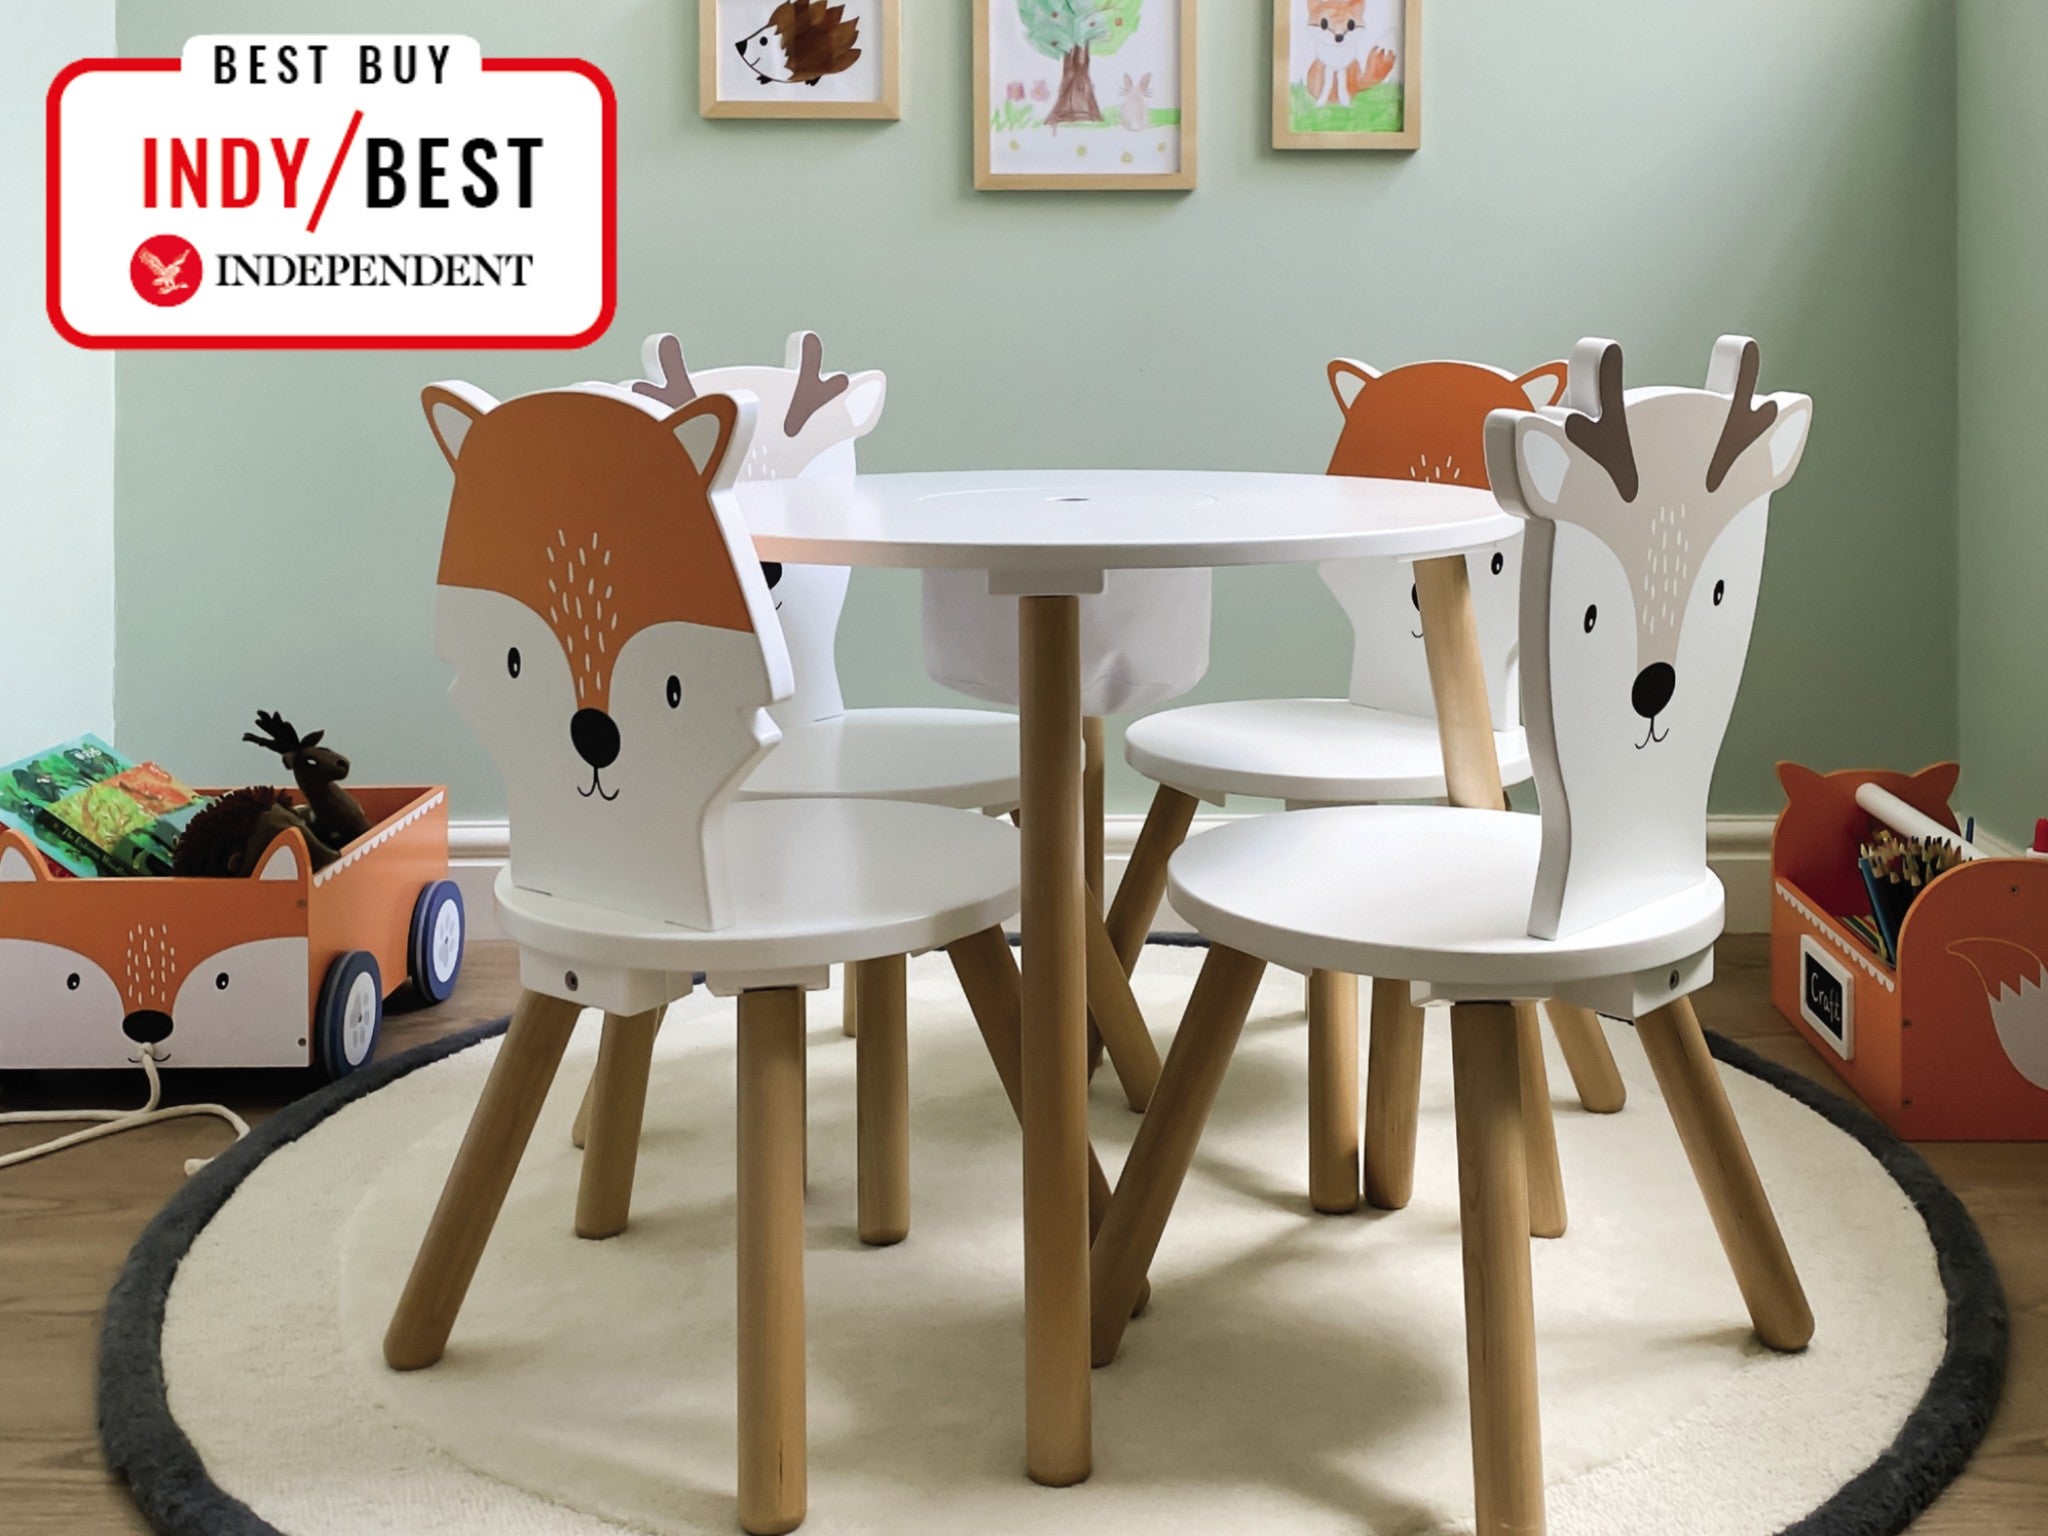 Garden Outdoor Childrens Furniture Premium Childrens Kids Plastic Study Table and Chair Set for Nursery